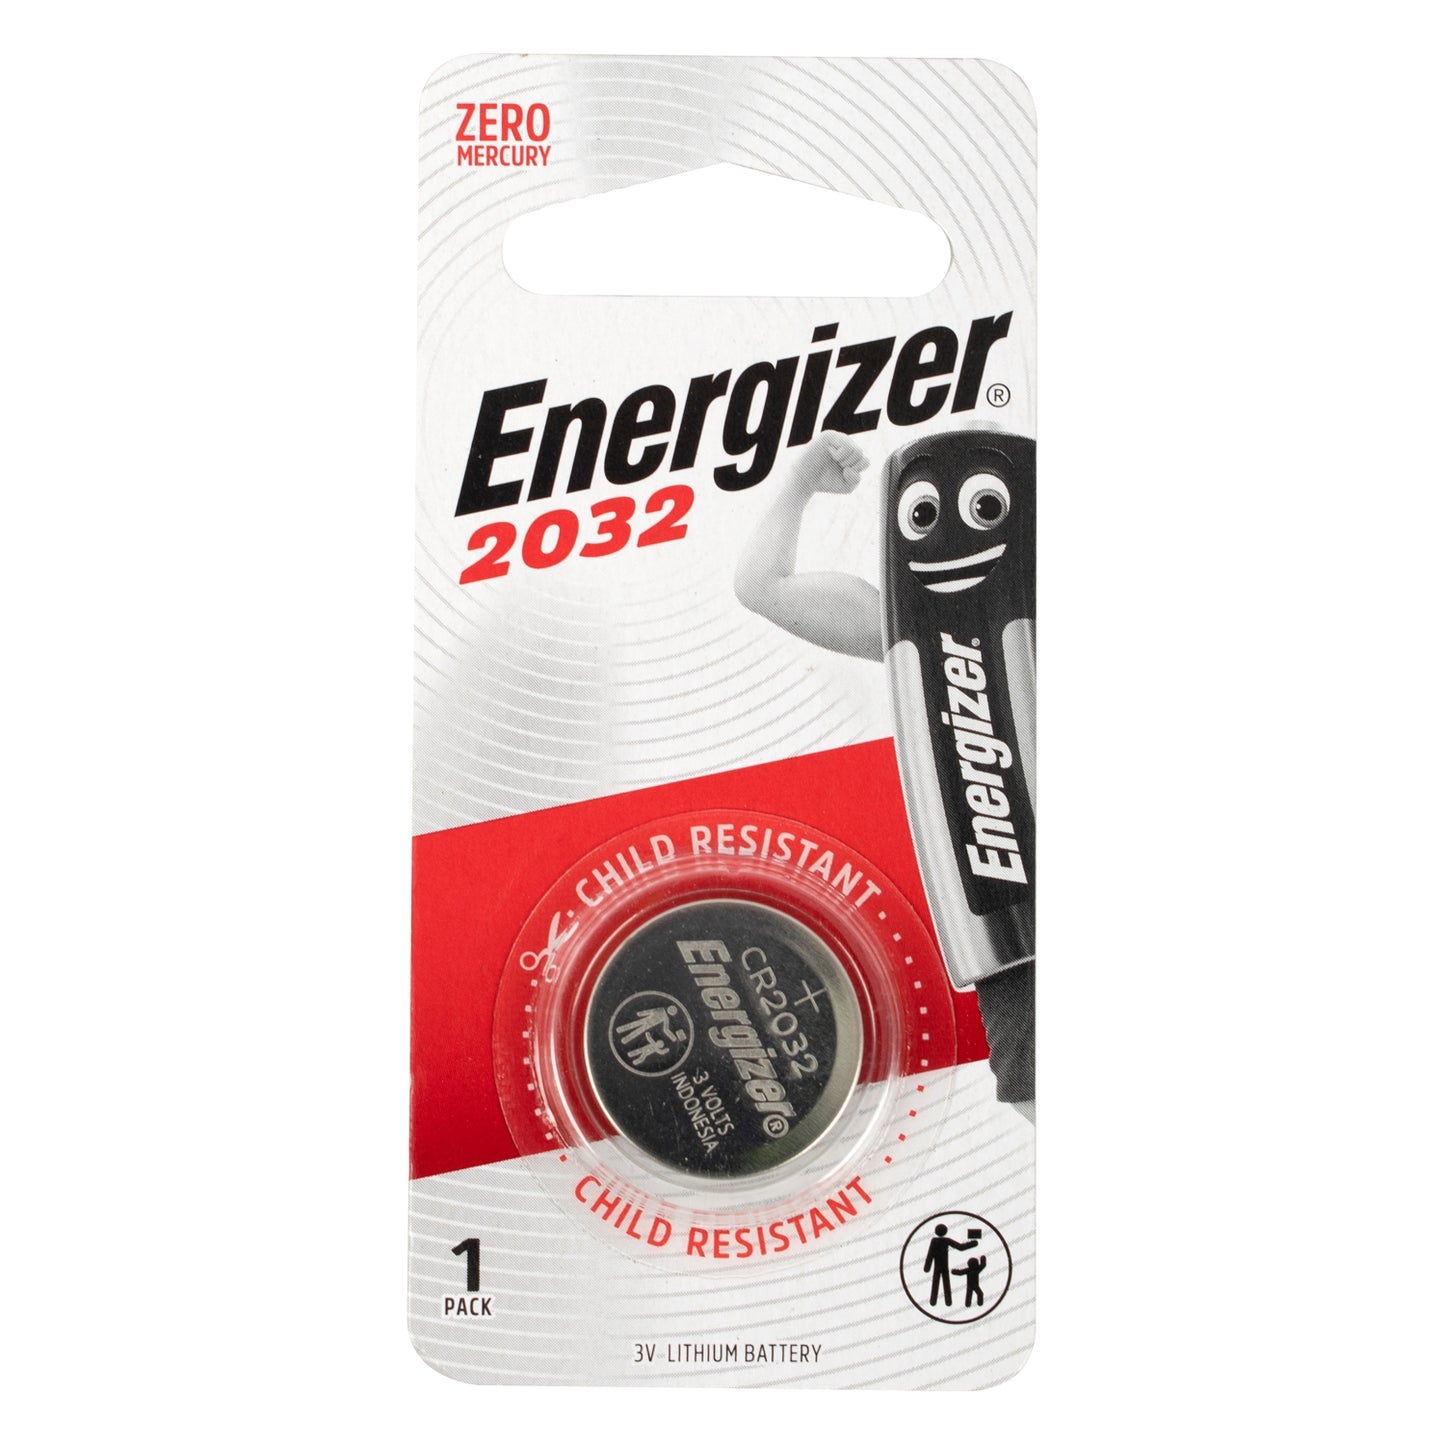 Energizer 2032 3v lithium coin battery 1 pack (moq x12)